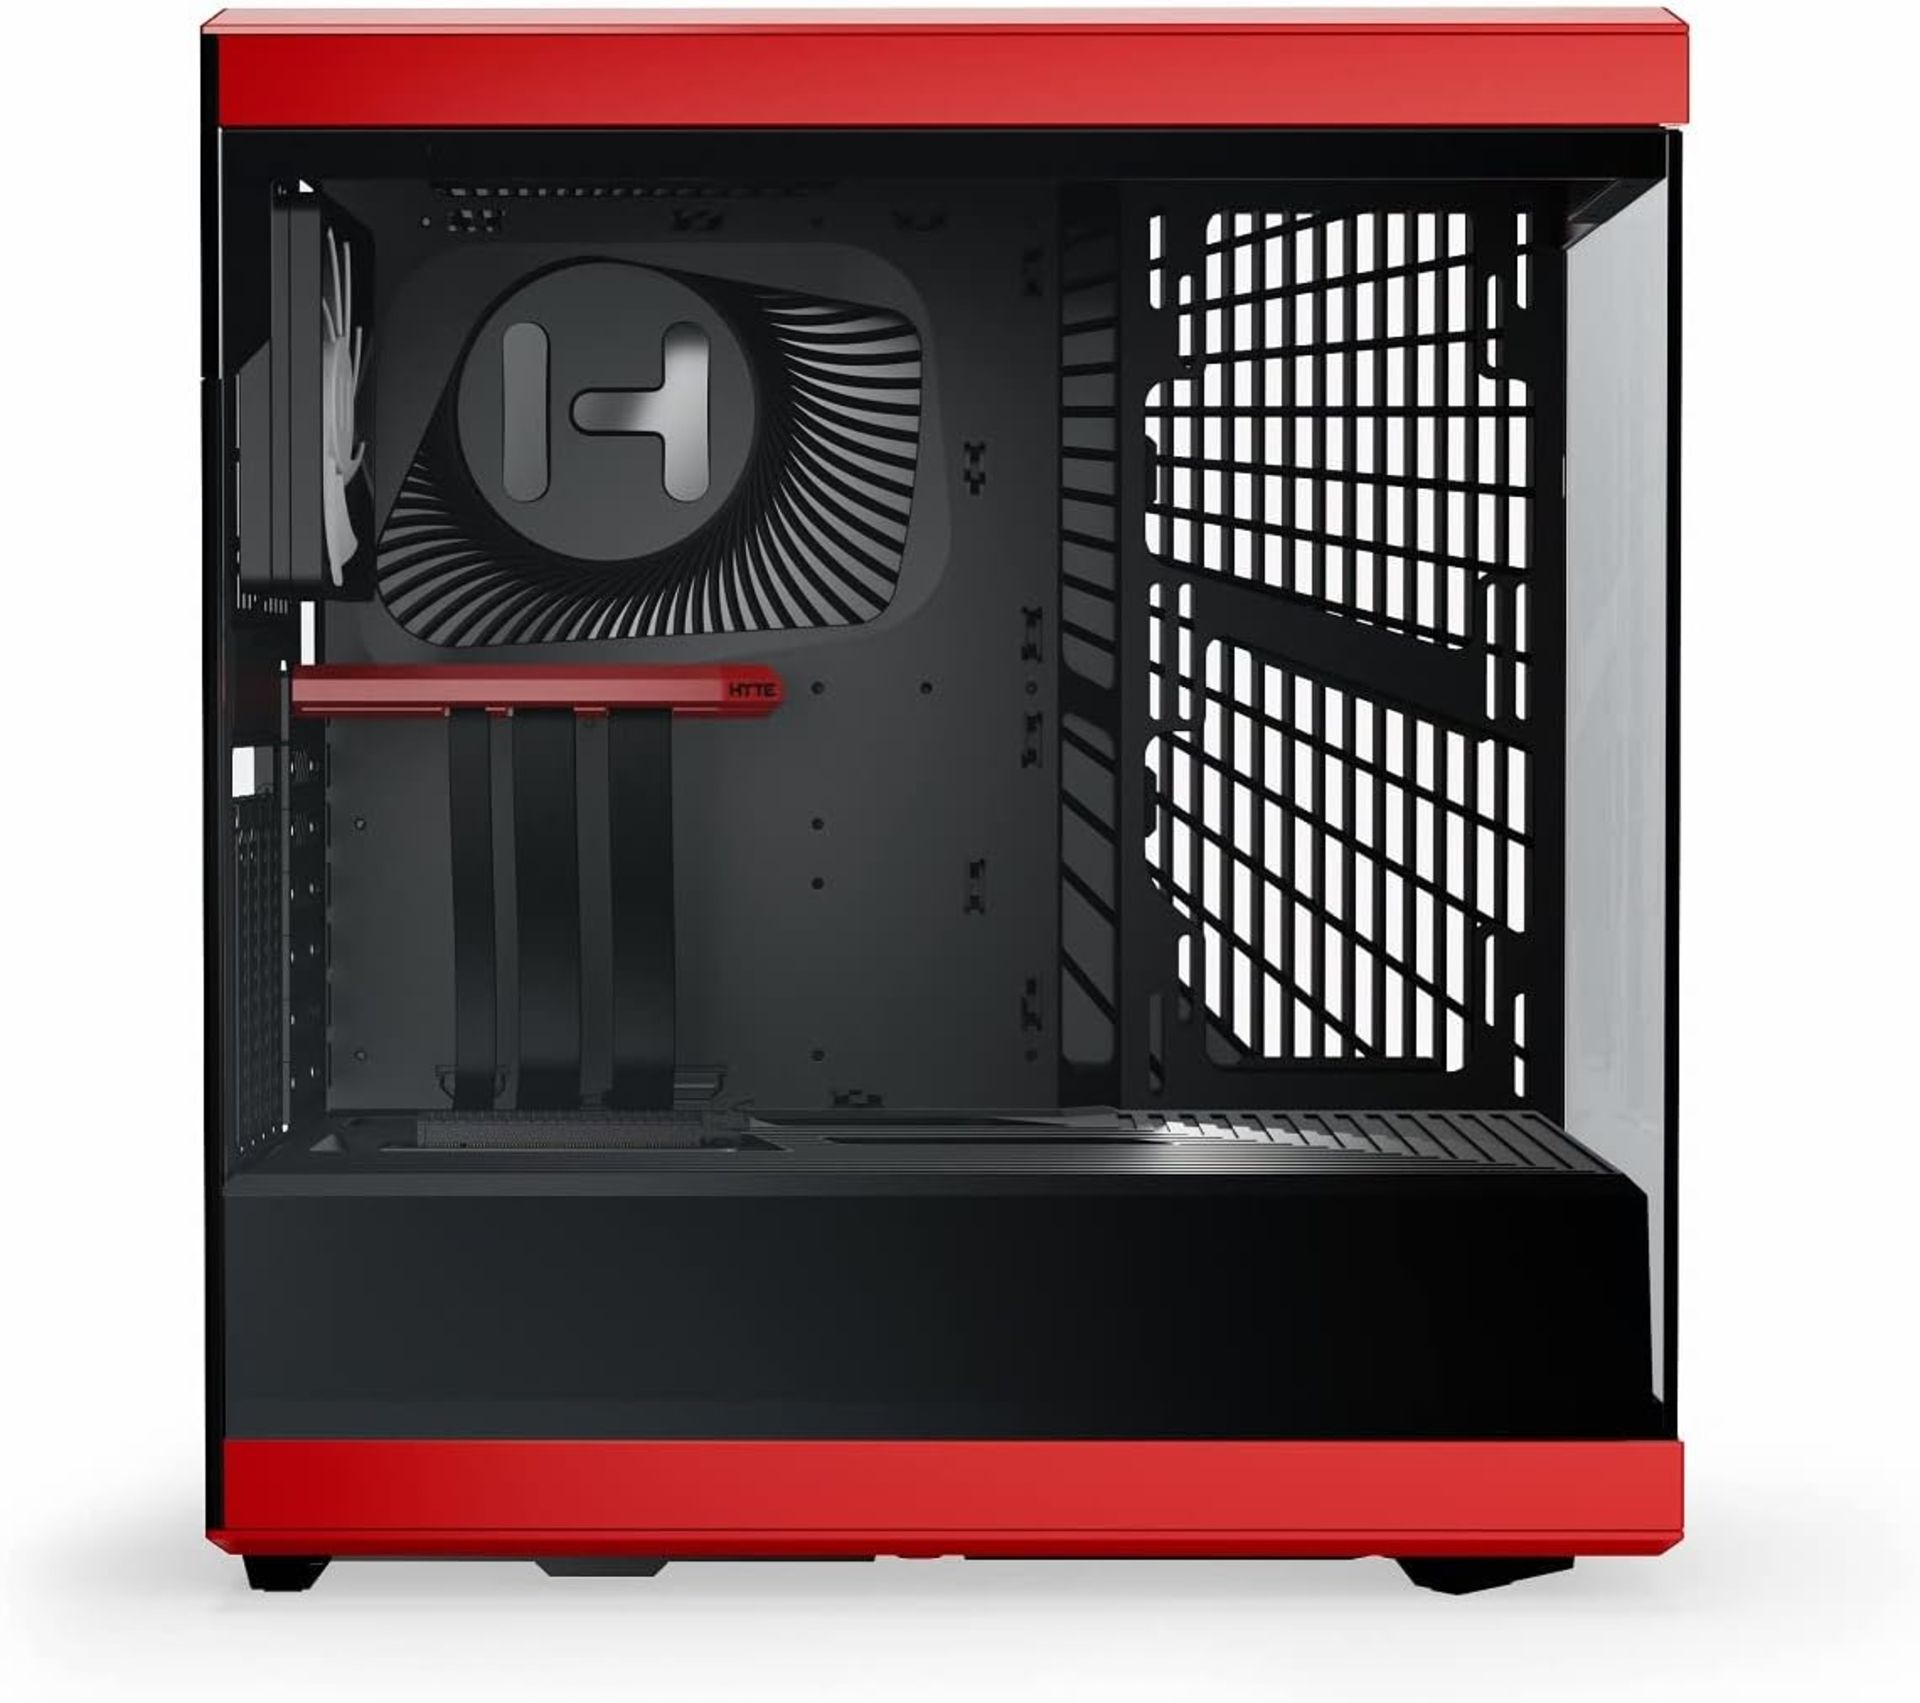 NEW & BOXED HYTE Y40 Mid-Tower ATX Case - Black & Red. RRP £164.99. (R6-7). The HYTE Y40 Mid-Tower - Image 4 of 5